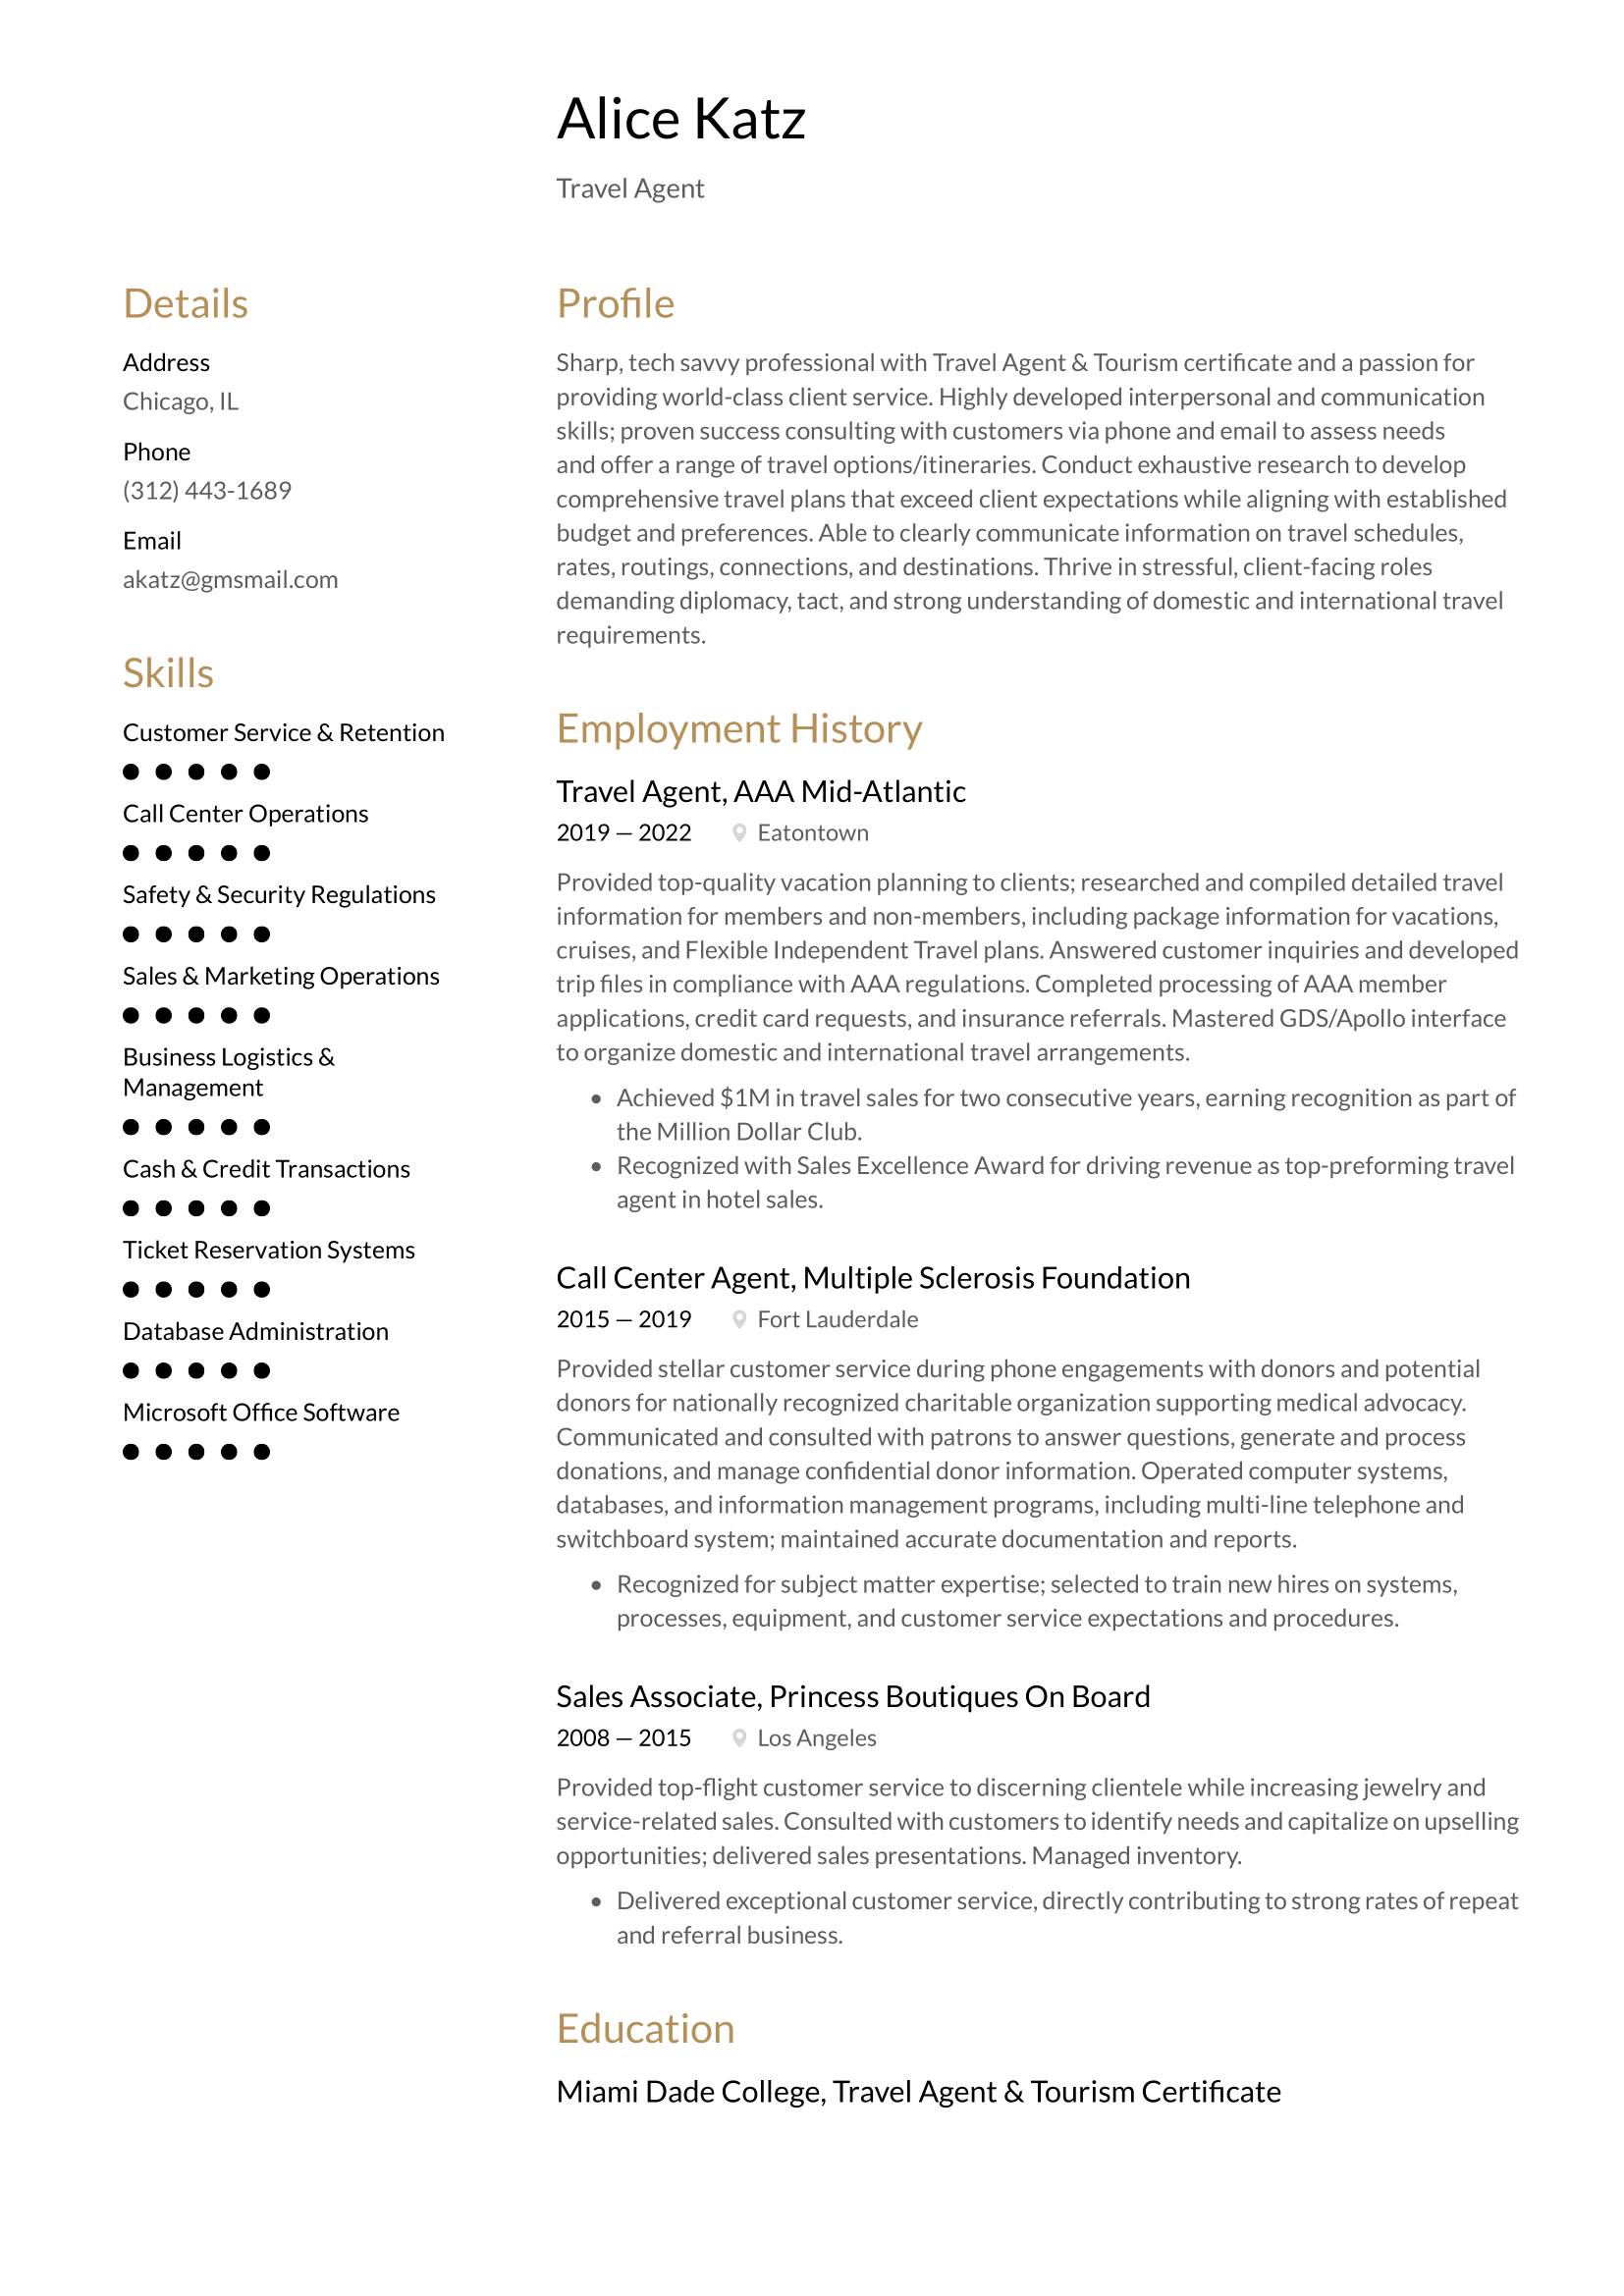 Travel_Agent-Resume-Example.png